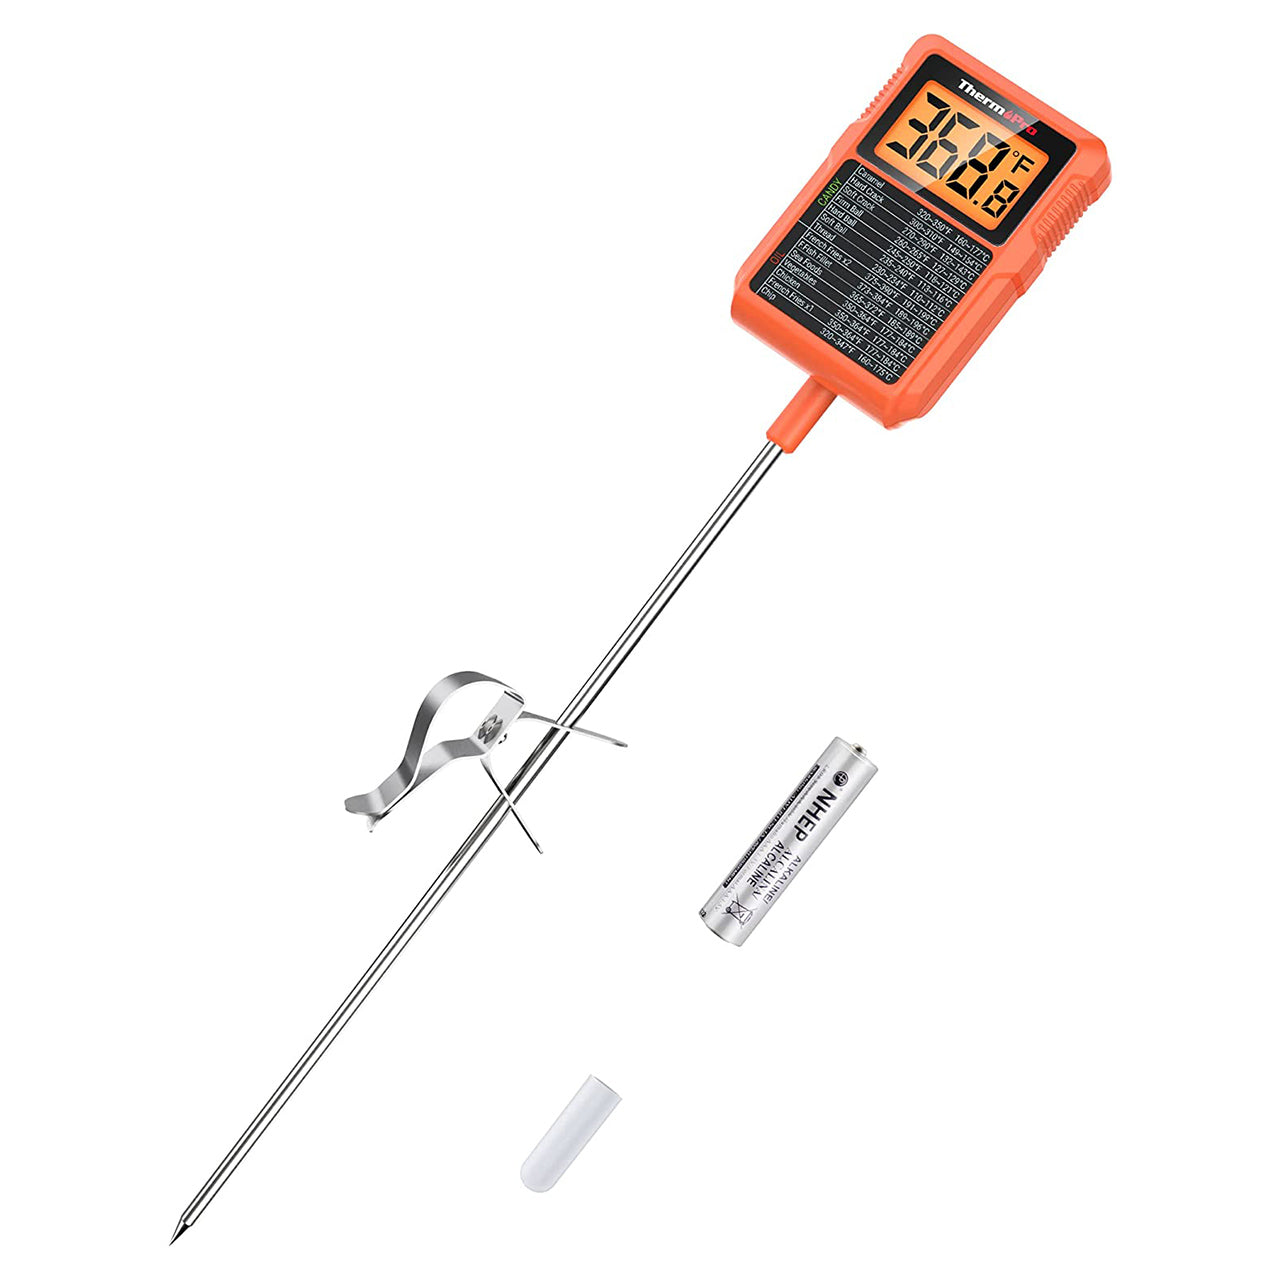 ThermoPro TP03 Digital Meat Thermometer for Cooking Kitchen Food + ThermoPro  TP710 Instant Read Meat Thermometer Digital for Cooking - Yahoo Shopping